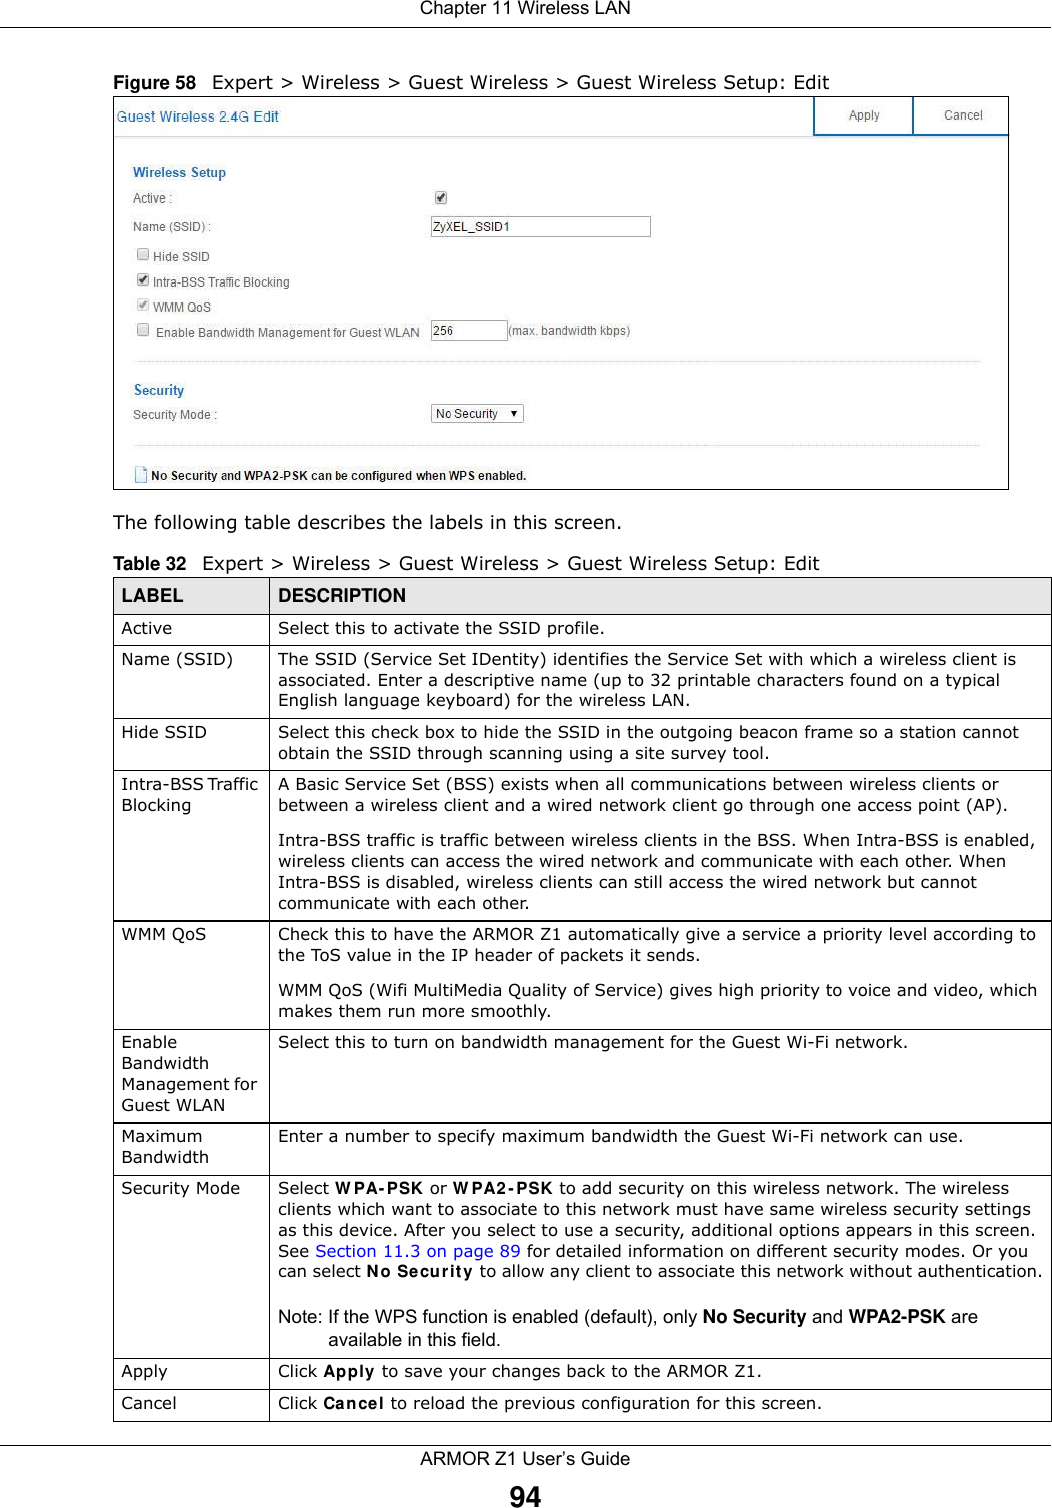 Chapter 11 Wireless LANARMOR Z1 User’s Guide94Figure 58   Expert &gt; Wireless &gt; Guest Wireless &gt; Guest Wireless Setup: Edit The following table describes the labels in this screen.Table 32   Expert &gt; Wireless &gt; Guest Wireless &gt; Guest Wireless Setup: EditLABEL DESCRIPTIONActive Select this to activate the SSID profile.Name (SSID)  The SSID (Service Set IDentity) identifies the Service Set with which a wireless client is associated. Enter a descriptive name (up to 32 printable characters found on a typical English language keyboard) for the wireless LAN. Hide SSID Select this check box to hide the SSID in the outgoing beacon frame so a station cannot obtain the SSID through scanning using a site survey tool.Intra-BSS Traffic BlockingA Basic Service Set (BSS) exists when all communications between wireless clients or between a wireless client and a wired network client go through one access point (AP). Intra-BSS traffic is traffic between wireless clients in the BSS. When Intra-BSS is enabled, wireless clients can access the wired network and communicate with each other. When Intra-BSS is disabled, wireless clients can still access the wired network but cannot communicate with each other.WMM QoS Check this to have the ARMOR Z1 automatically give a service a priority level according to the ToS value in the IP header of packets it sends. WMM QoS (Wifi MultiMedia Quality of Service) gives high priority to voice and video, which makes them run more smoothly.Enable Bandwidth Management for Guest WLAN Select this to turn on bandwidth management for the Guest Wi-Fi network.Maximum Bandwidth Enter a number to specify maximum bandwidth the Guest Wi-Fi network can use.Security Mode Select WPA-PSK or WPA2-PSK to add security on this wireless network. The wireless clients which want to associate to this network must have same wireless security settings as this device. After you select to use a security, additional options appears in this screen. See Section 11.3 on page 89 for detailed information on different security modes. Or you can select No Security to allow any client to associate this network without authentication.Note: If the WPS function is enabled (default), only No Security and WPA2-PSK are available in this field.Apply Click Apply to save your changes back to the ARMOR Z1.Cancel Click Cancel to reload the previous configuration for this screen.